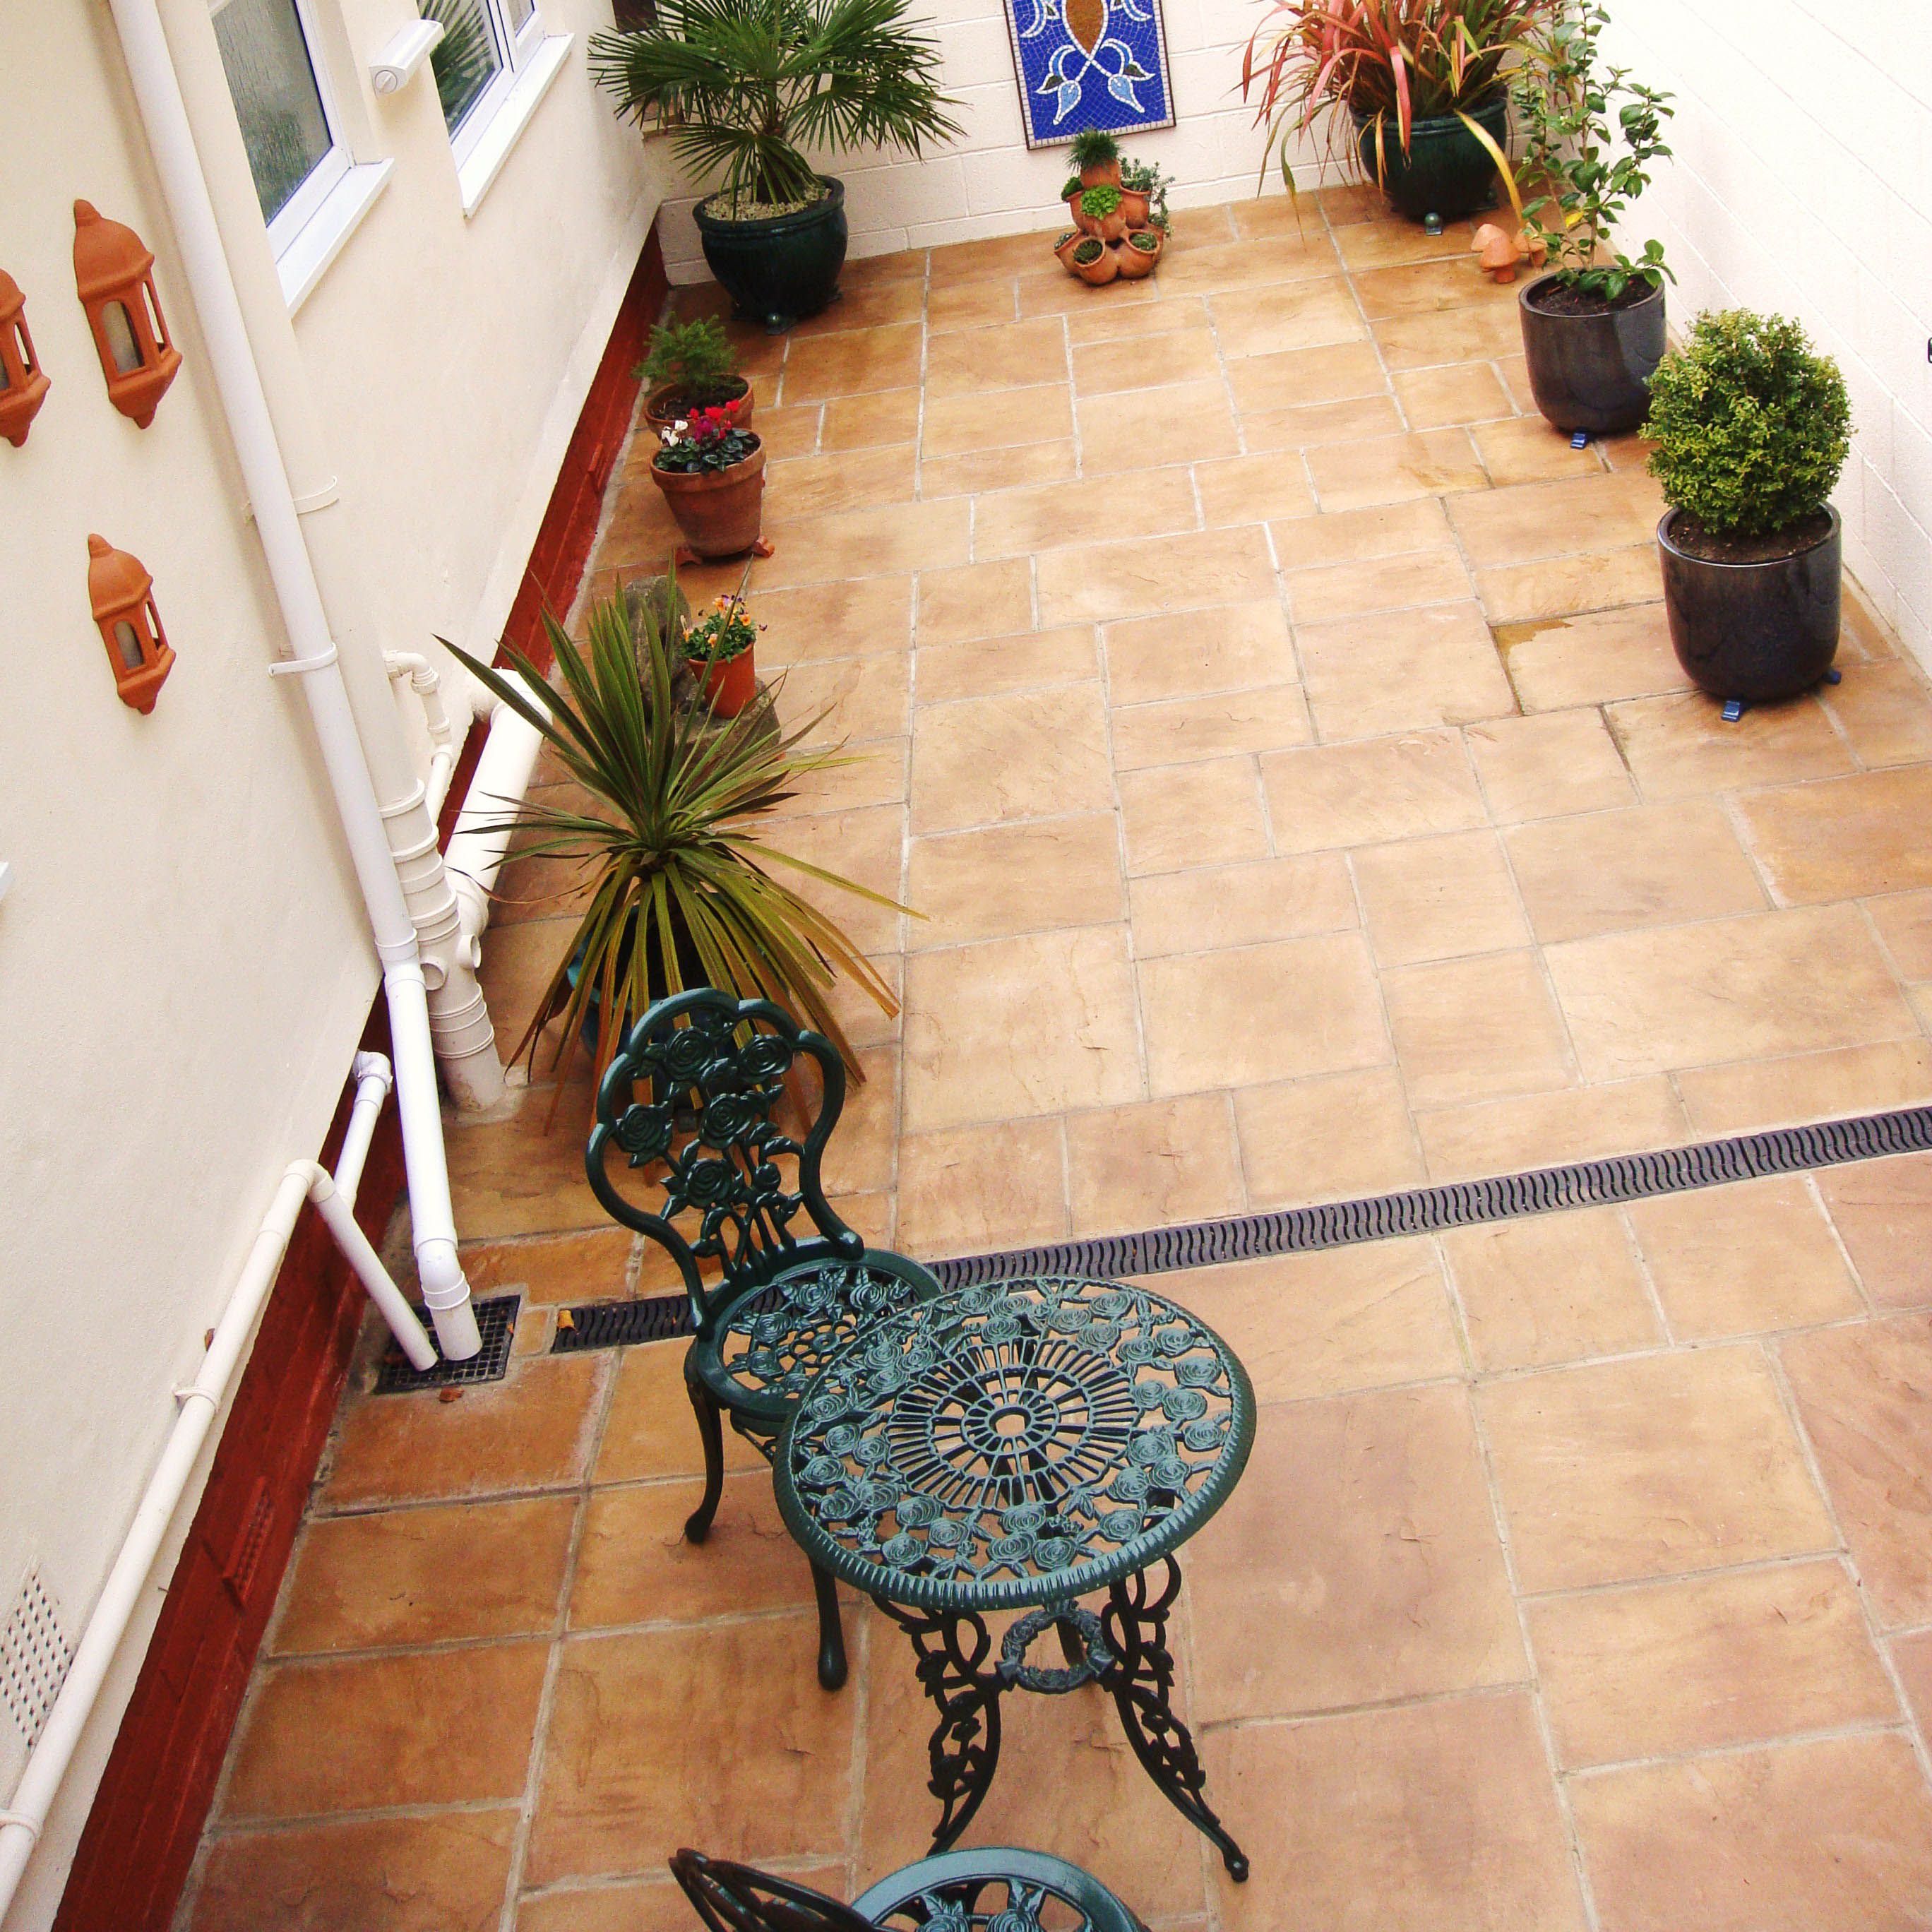 Bradstone Old Riven Paving in Autumn Cotswold is perfect for creating a rustic Mediterranean themed patio area.